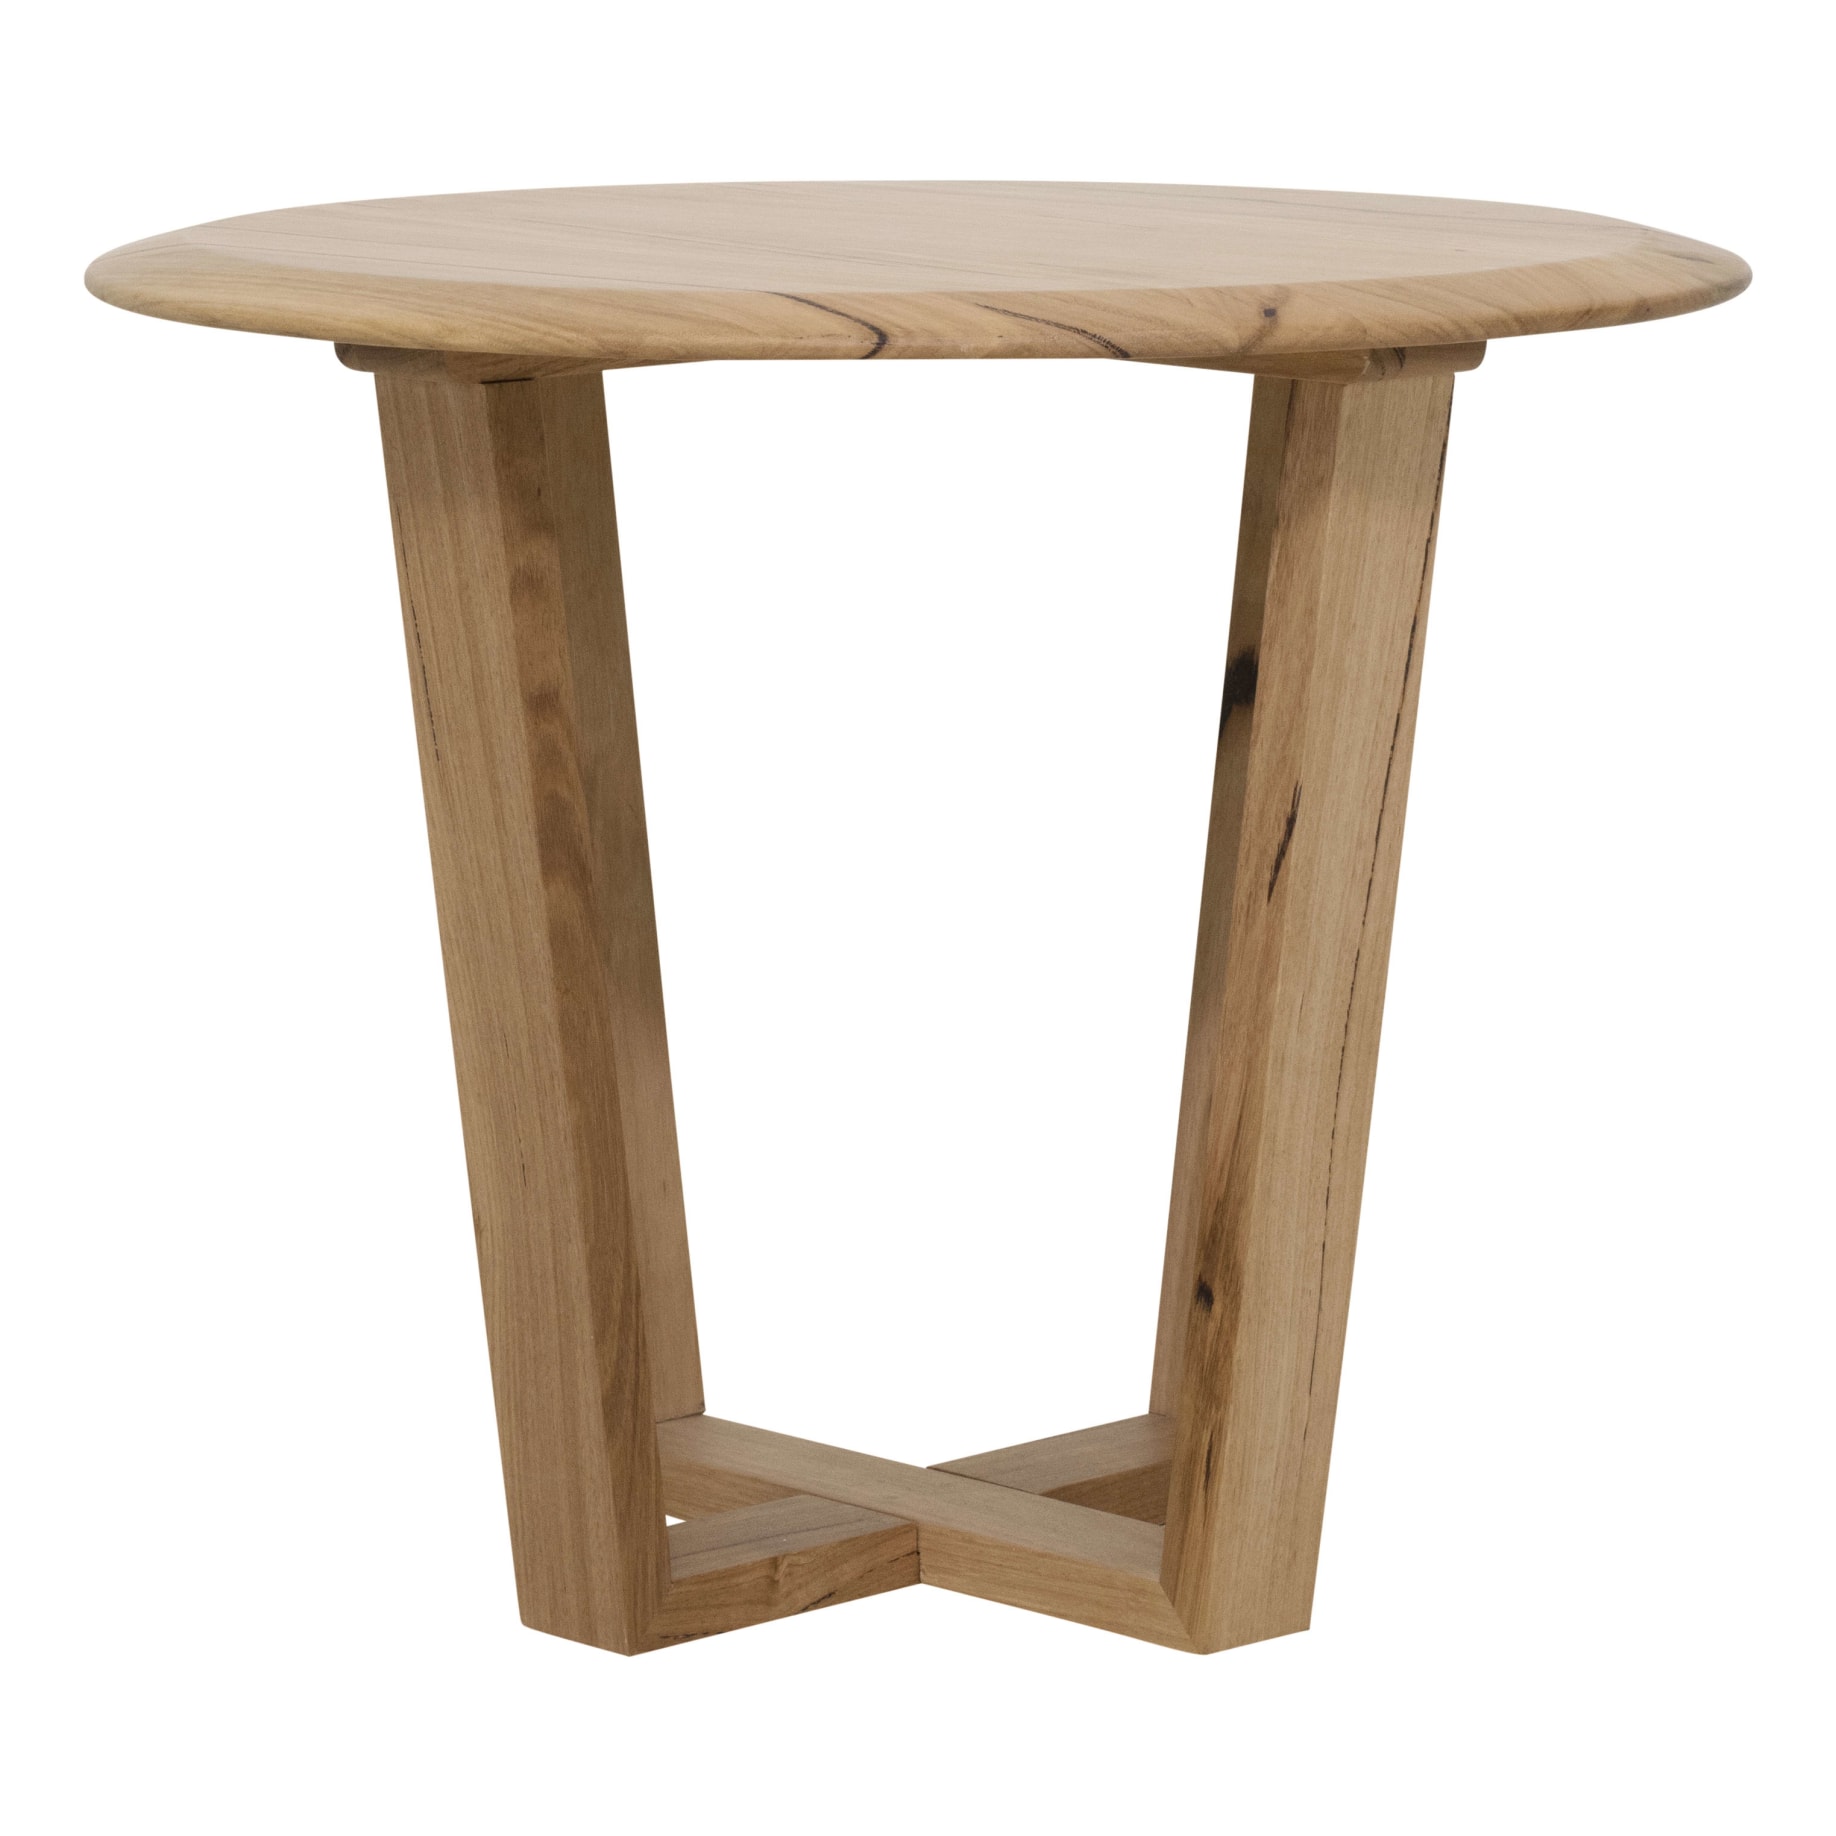 Baxter Round Side Table 60cm in Australian Messmate